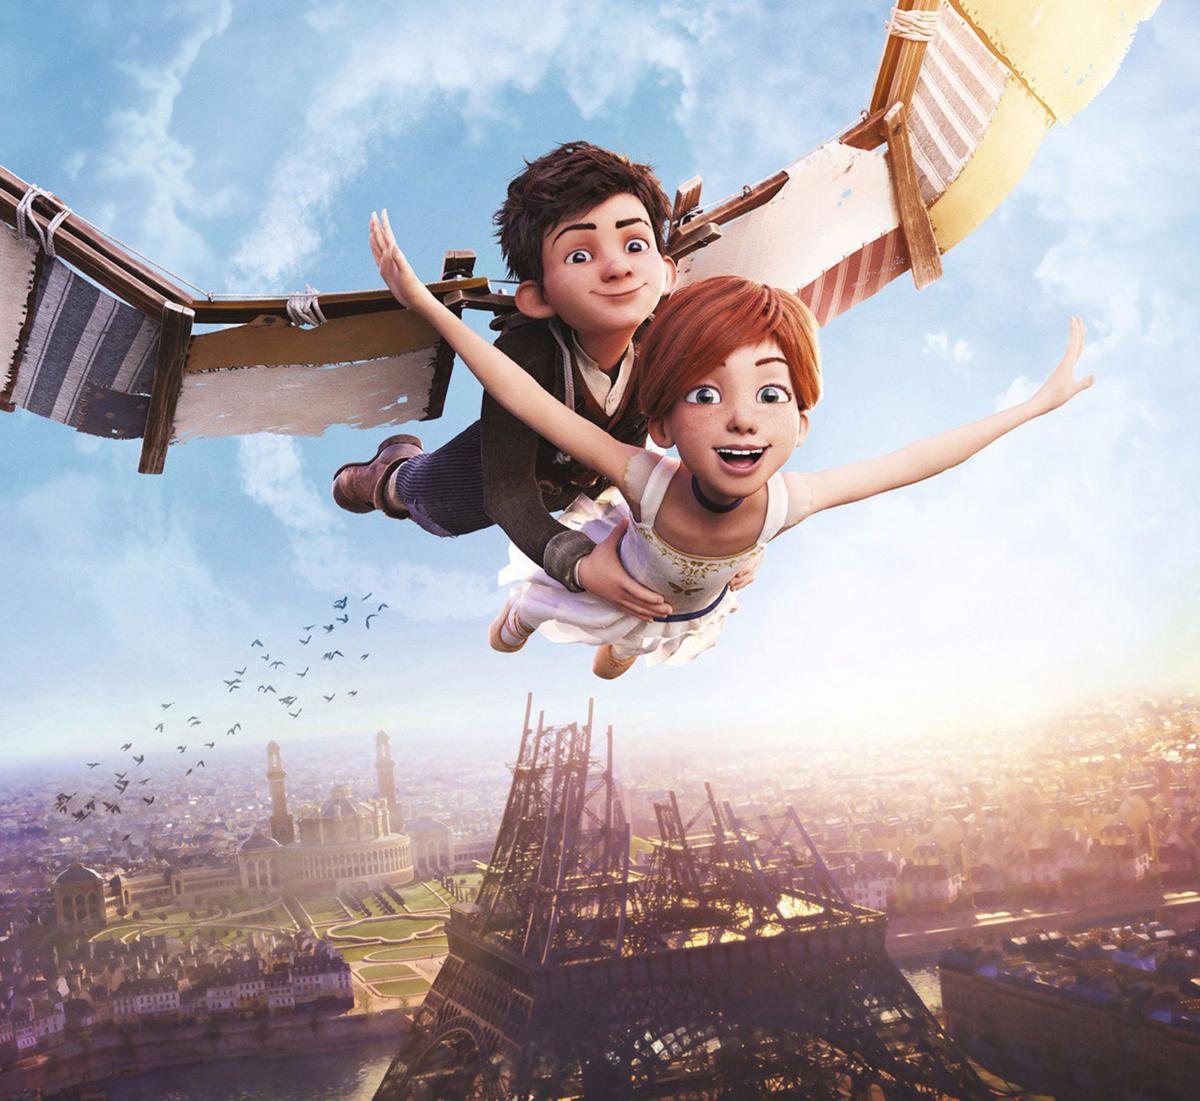 Movie review: 'Leap!' trips over its sloppy story